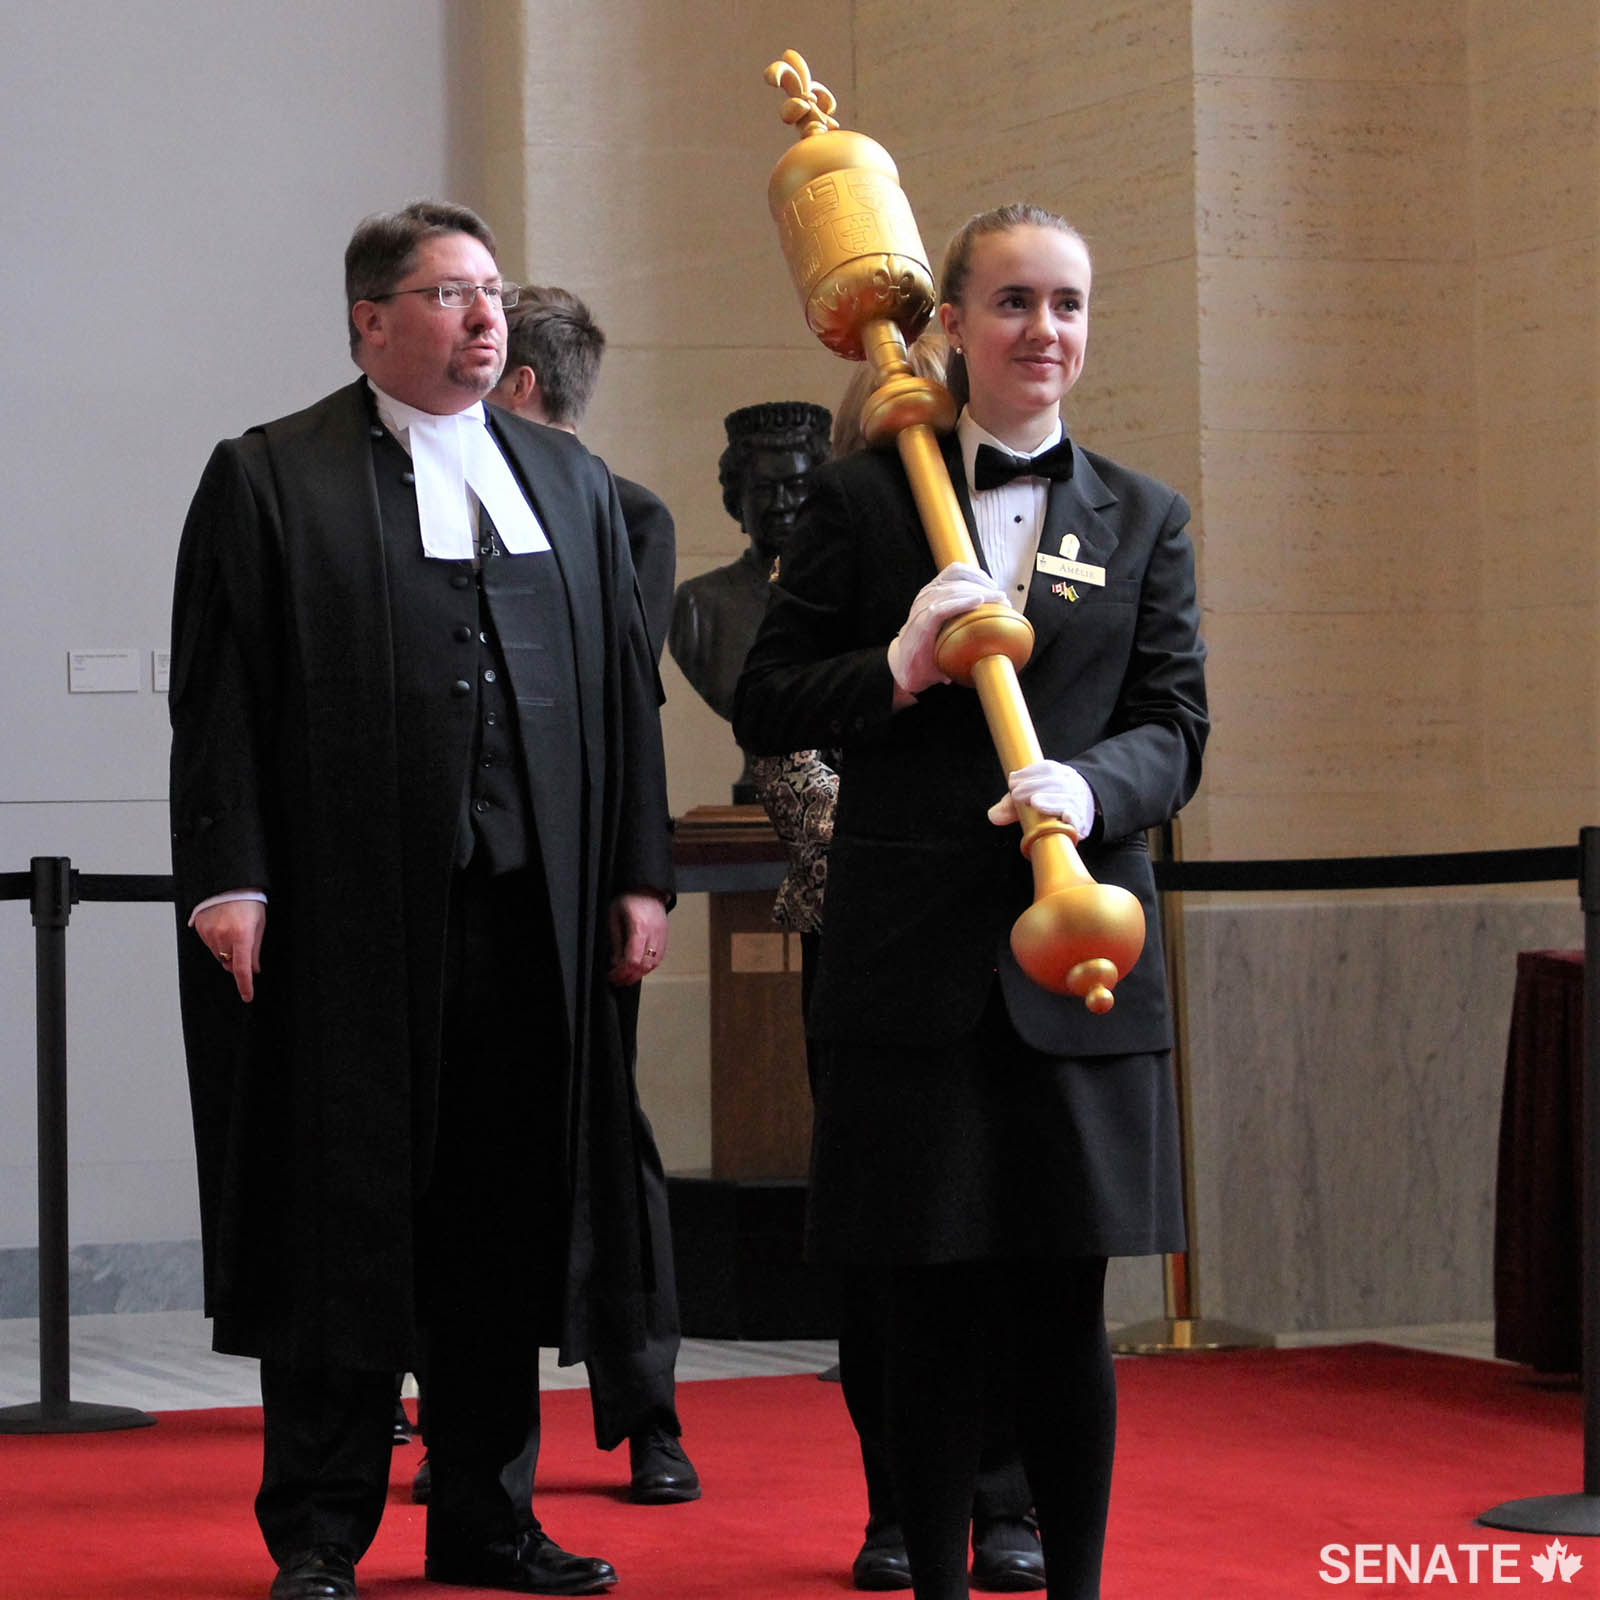 Senate Page Amélie Boutin prepares to carry the mace into the Senate Chamber as model Speaker Adam Thompson — normally a Senate table officer — looks on. The Fédération de la jeunesse canadienne-française generously loaned out its mace for the occasion. The real Senate cannot meet without its mace being present.